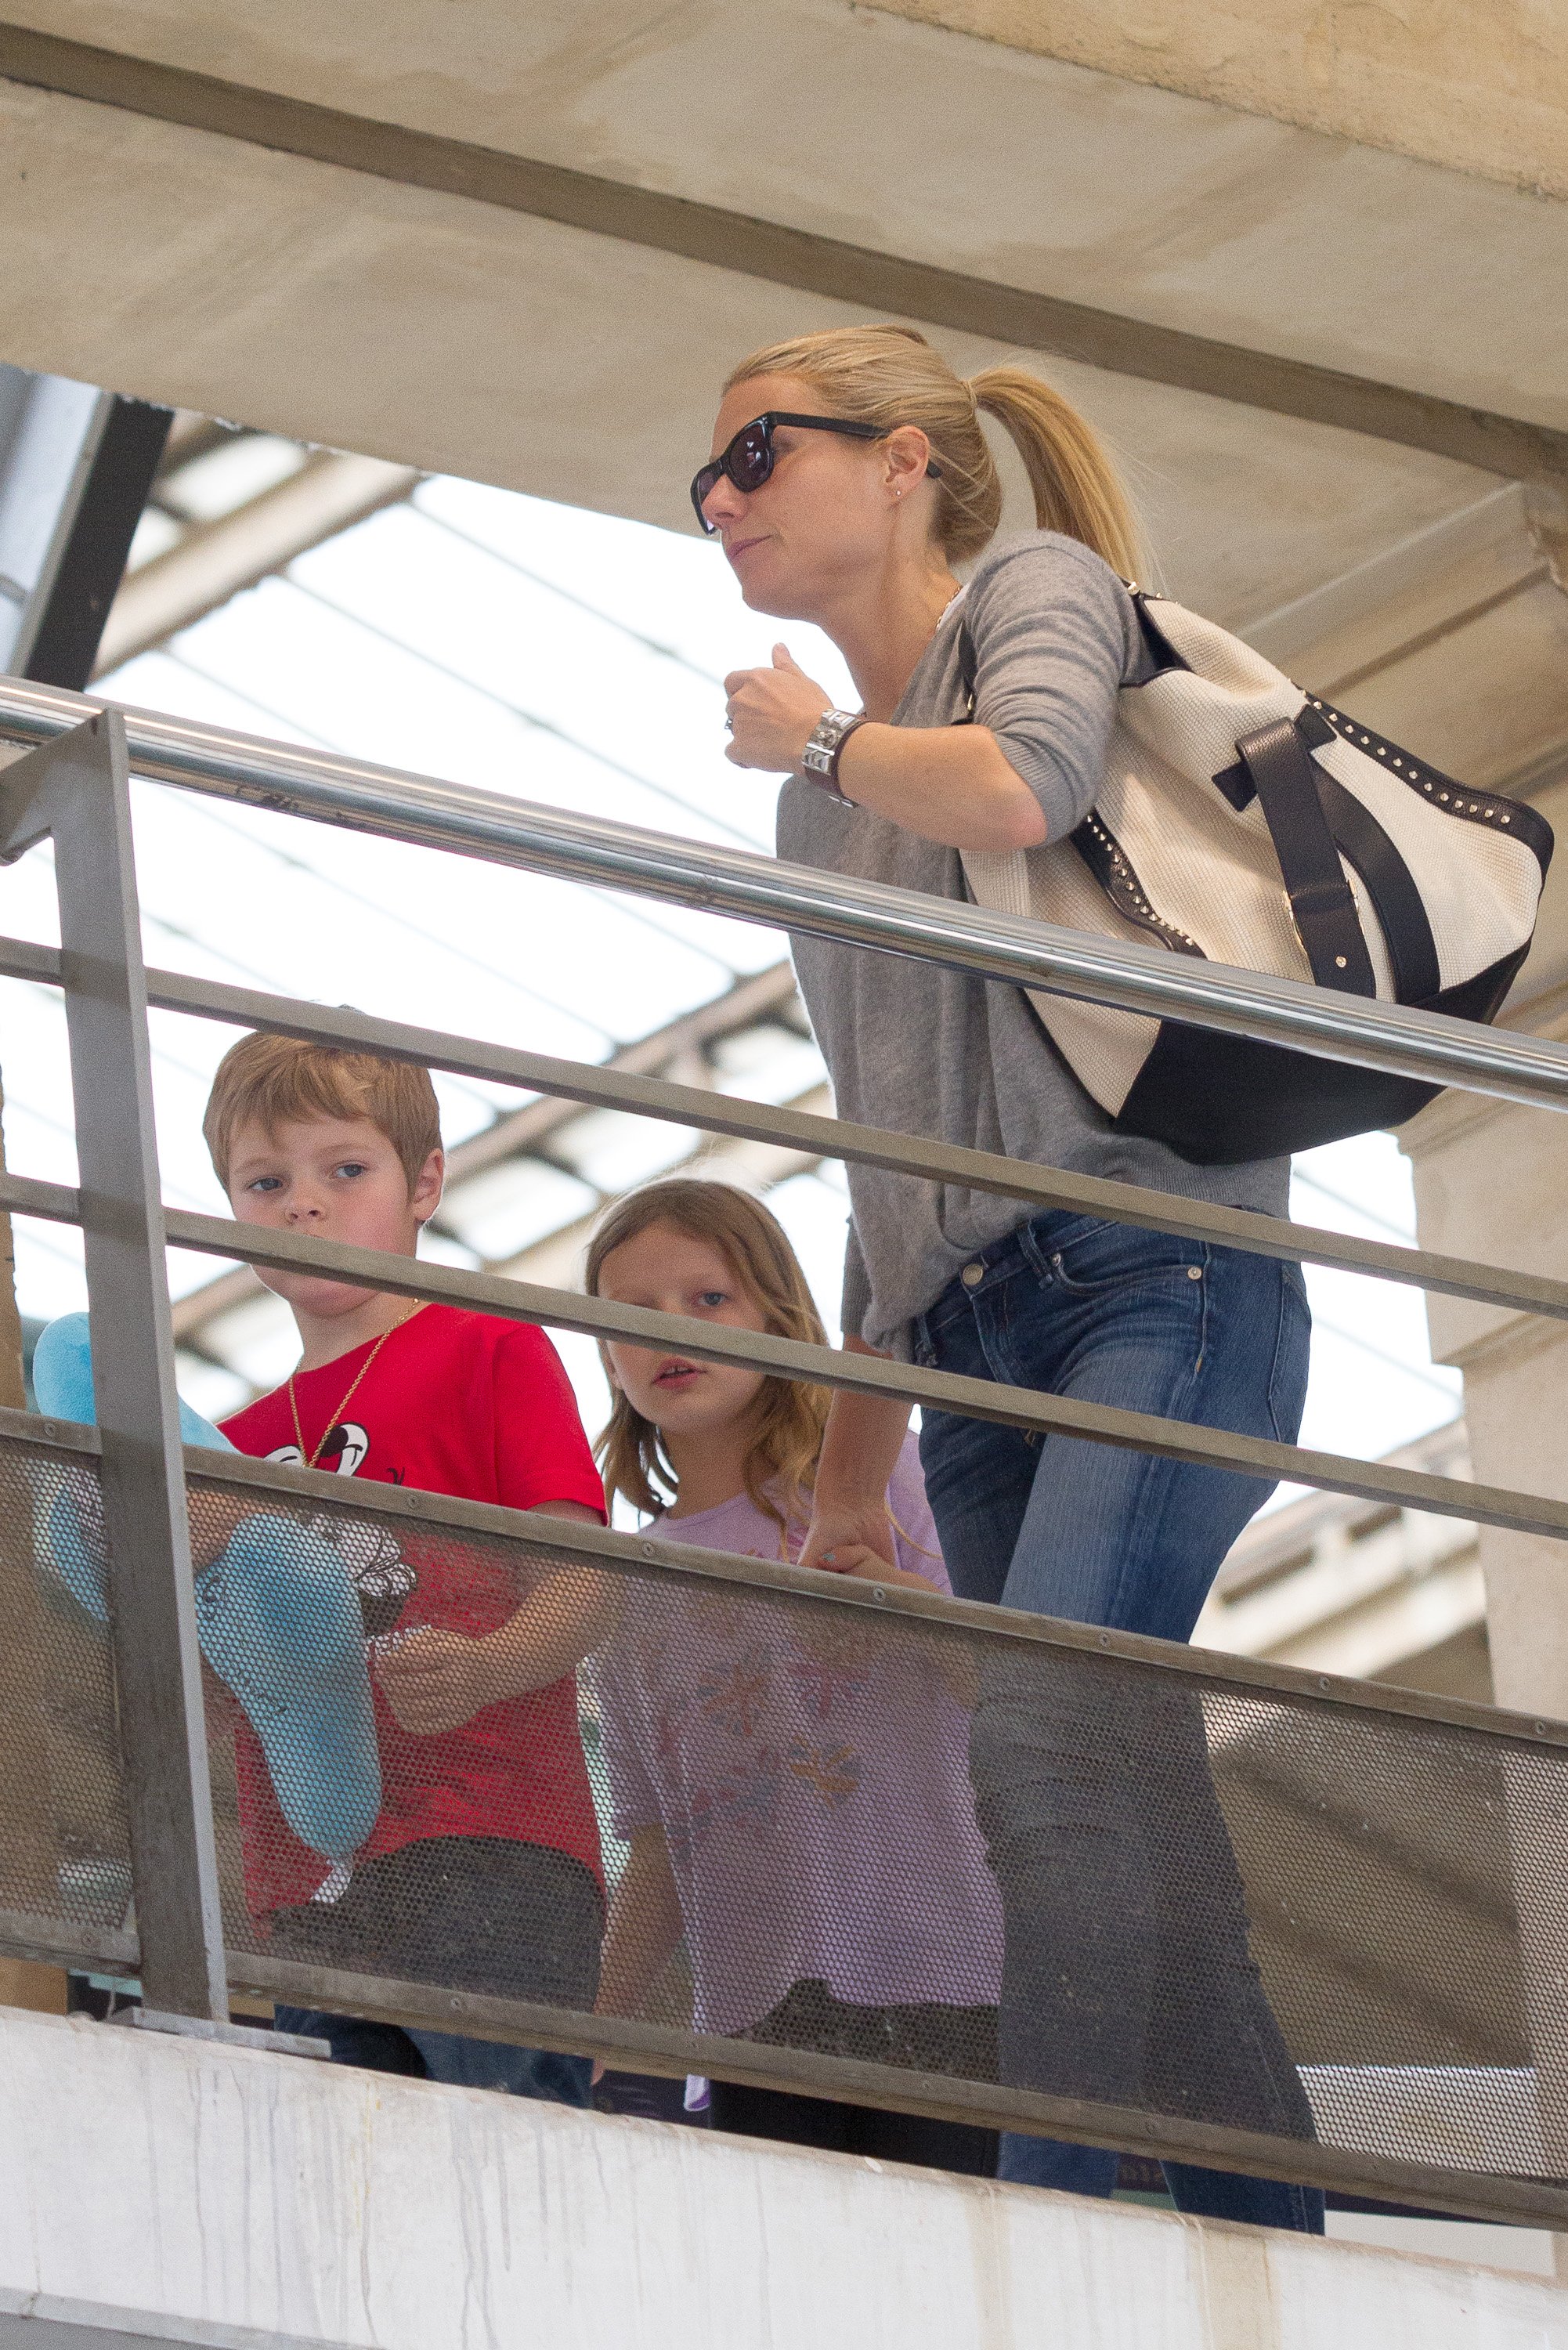 Gwyneth Paltrow and her children, son Moses and daughter Apple arriving at the Gare du Nord station on April 15, 2013 in Paris, France | Source: Getty Images